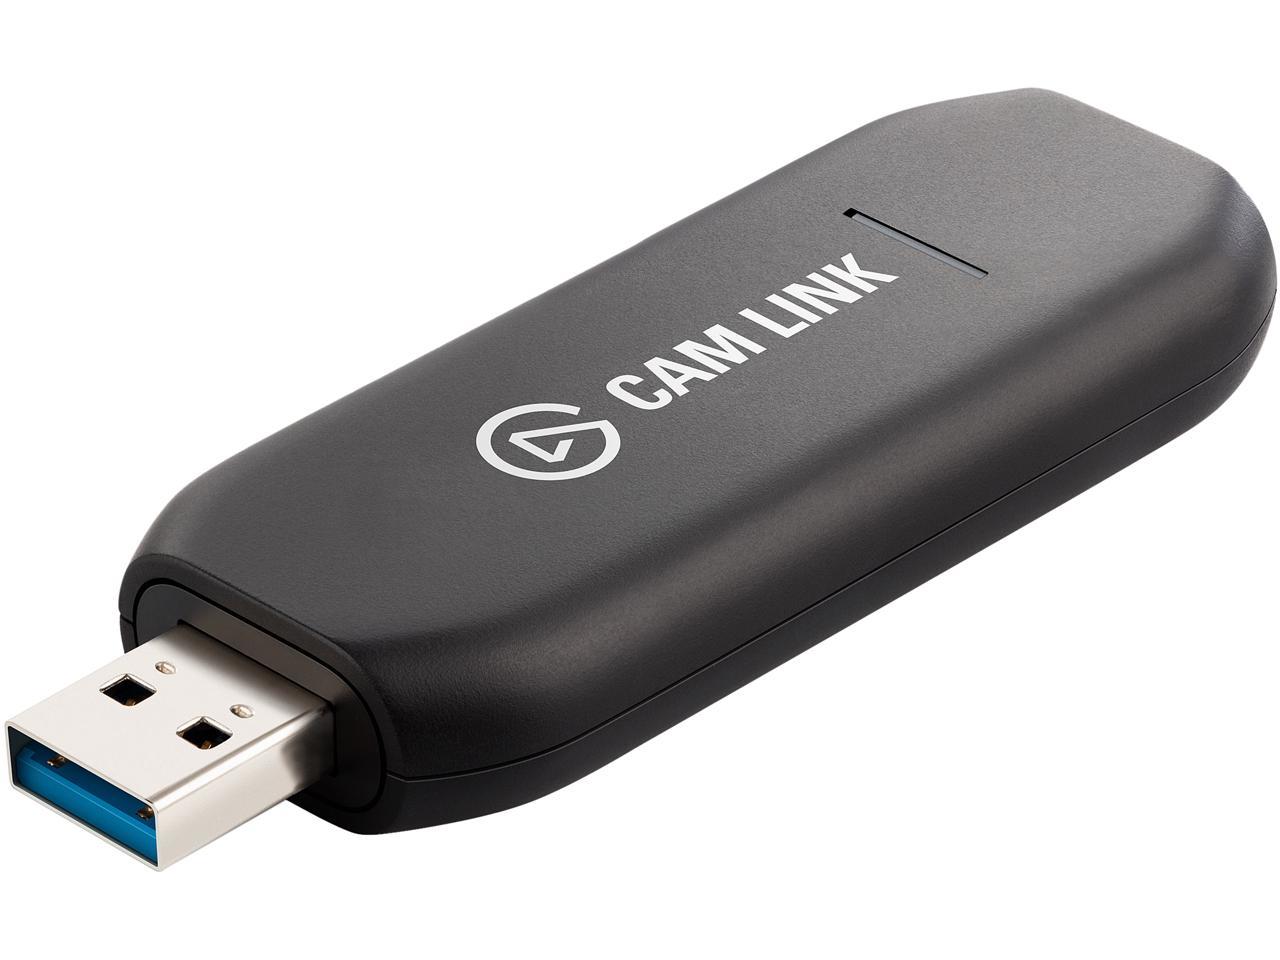 Elgato Cam Link 4K - HDMI to USB 3.0 Camera Connector, Broadcast Live and Record in 1080p60 or 4K at 30 fps via a Compatible DSLR, Camcorder or Action Cam - image 1 of 5